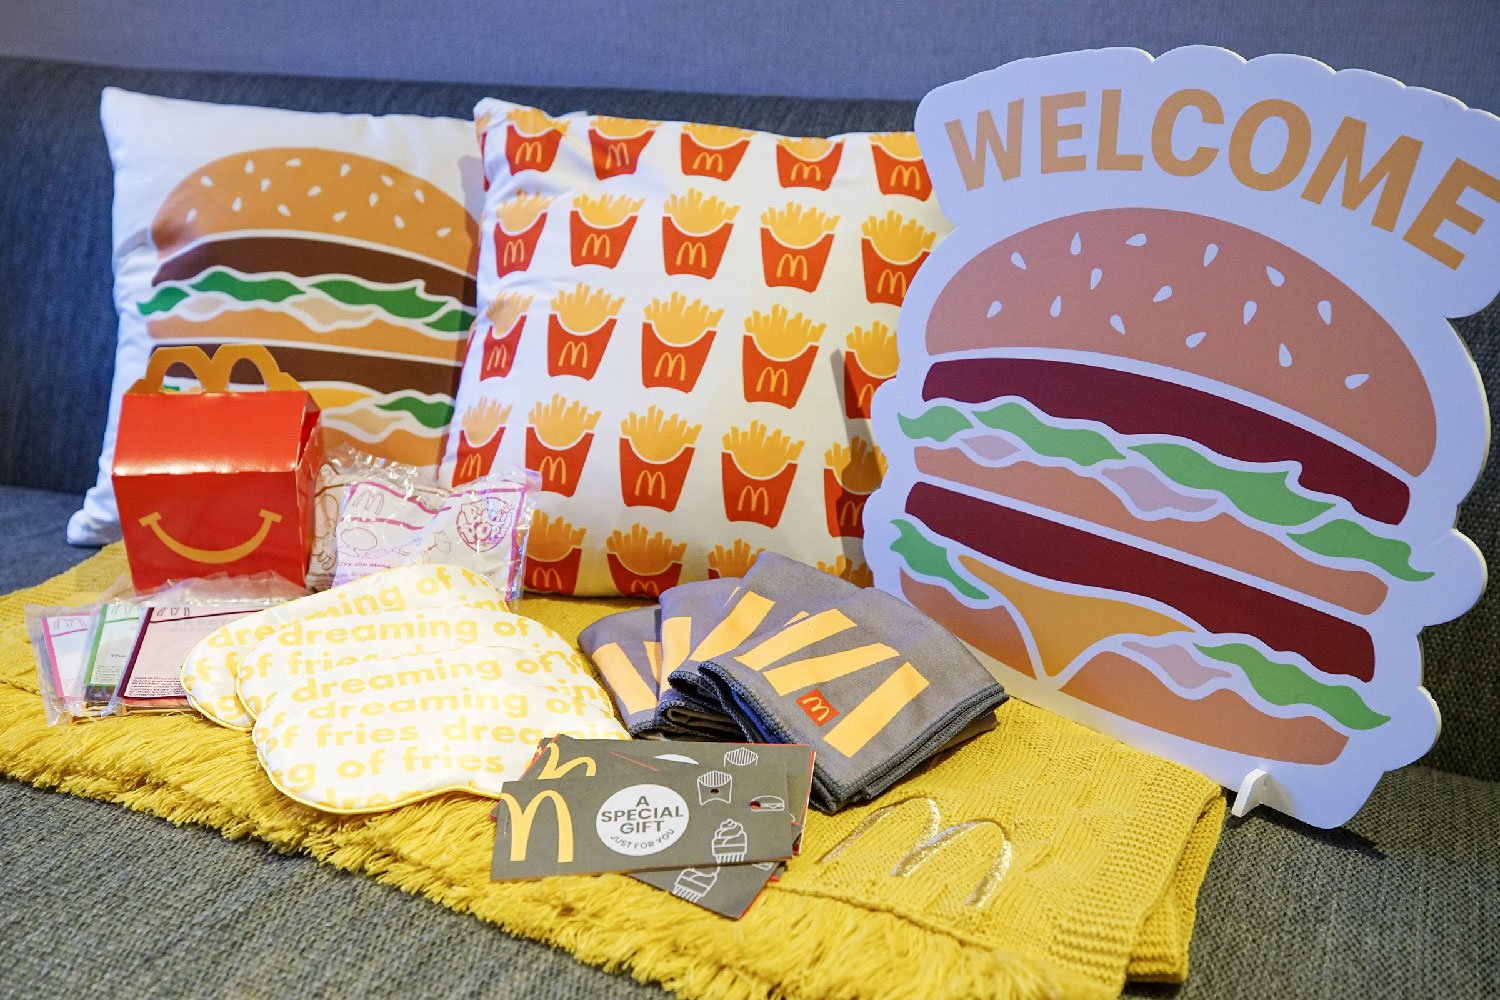 McDelivery®-x-Klook-‘Happiest-Night-In’-Staycation-Merchandise-4-(Credit--Klook-Singapore)